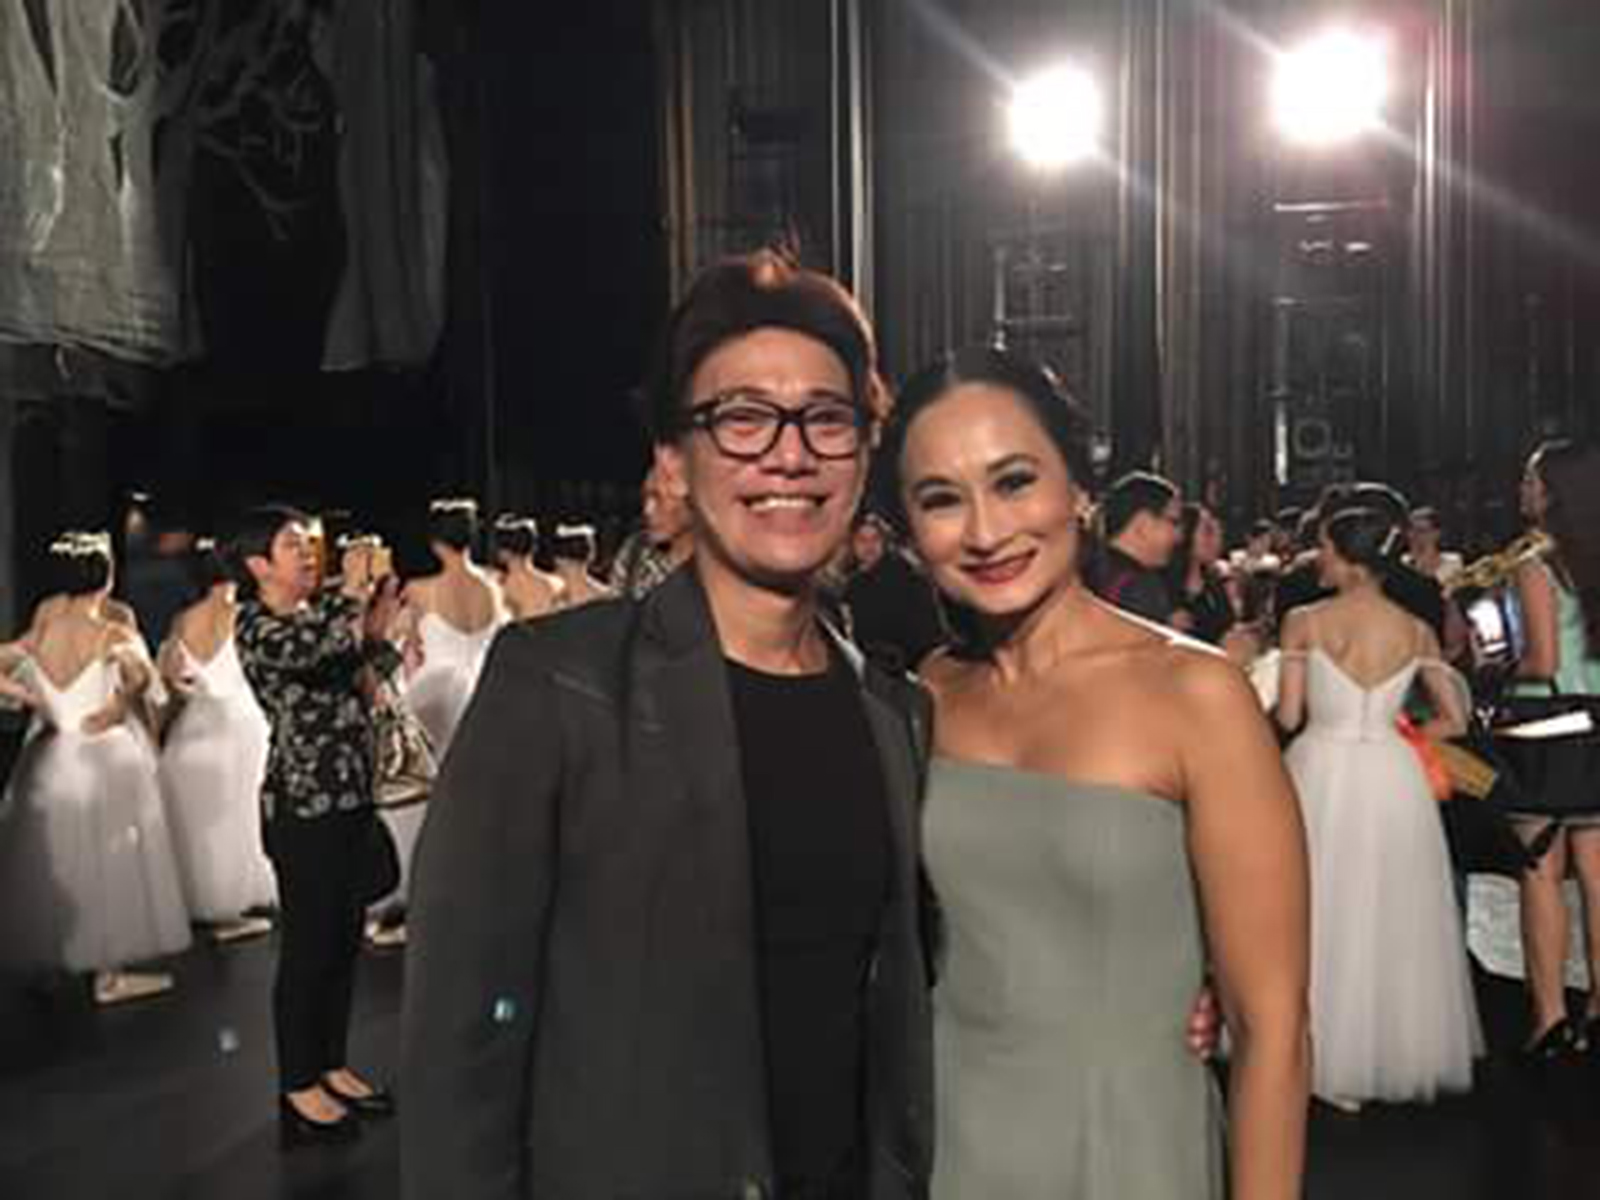 BM co-artistic directors Osias Barroso and Lisa Macuja-Elizalde smile in triumph after the warmly received performance of Giselle.